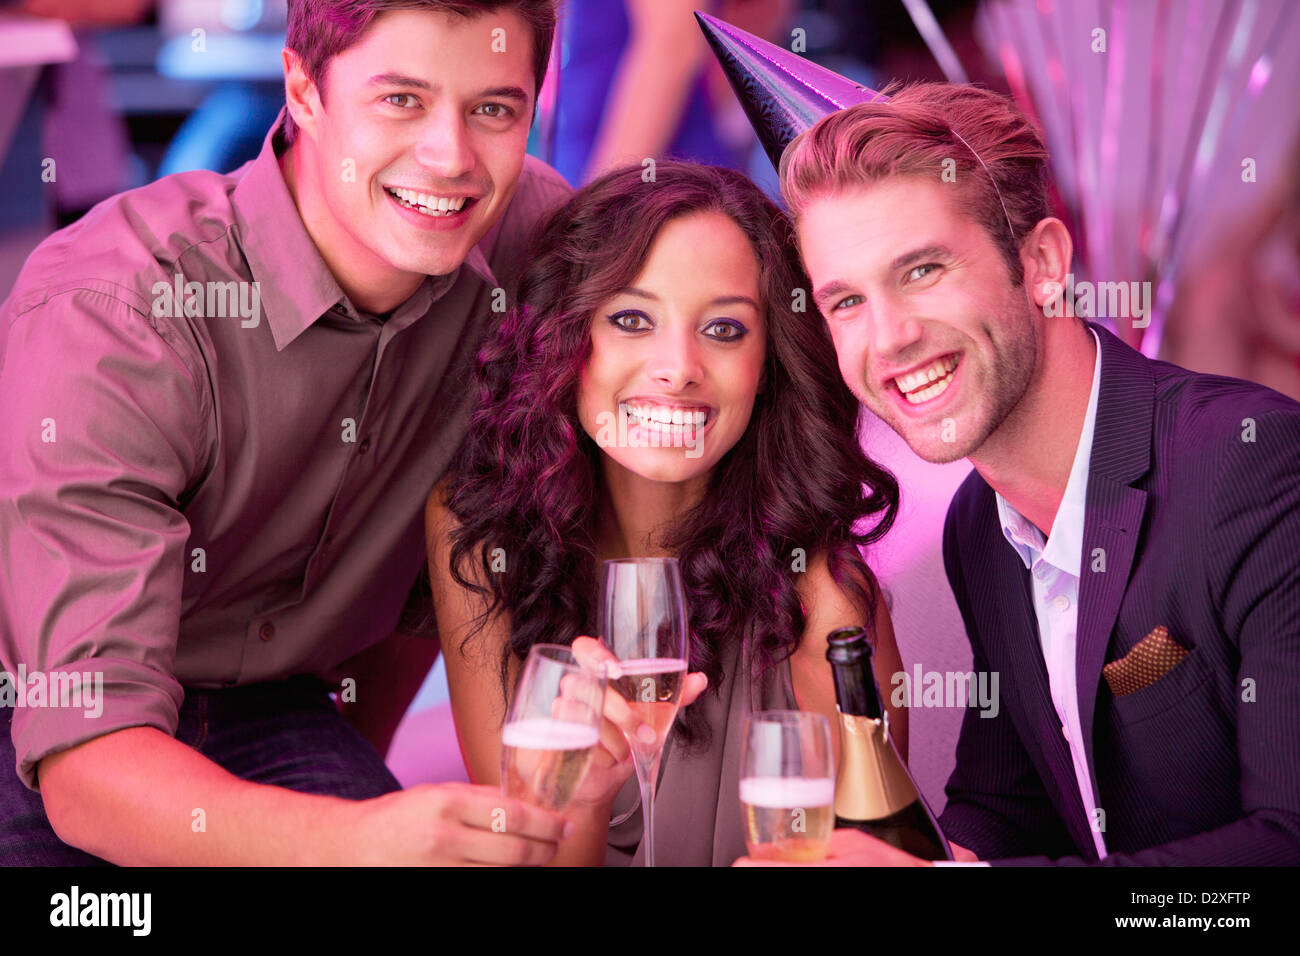 Portrait of smiling friends drinking champagne in nightclub Stock Photo